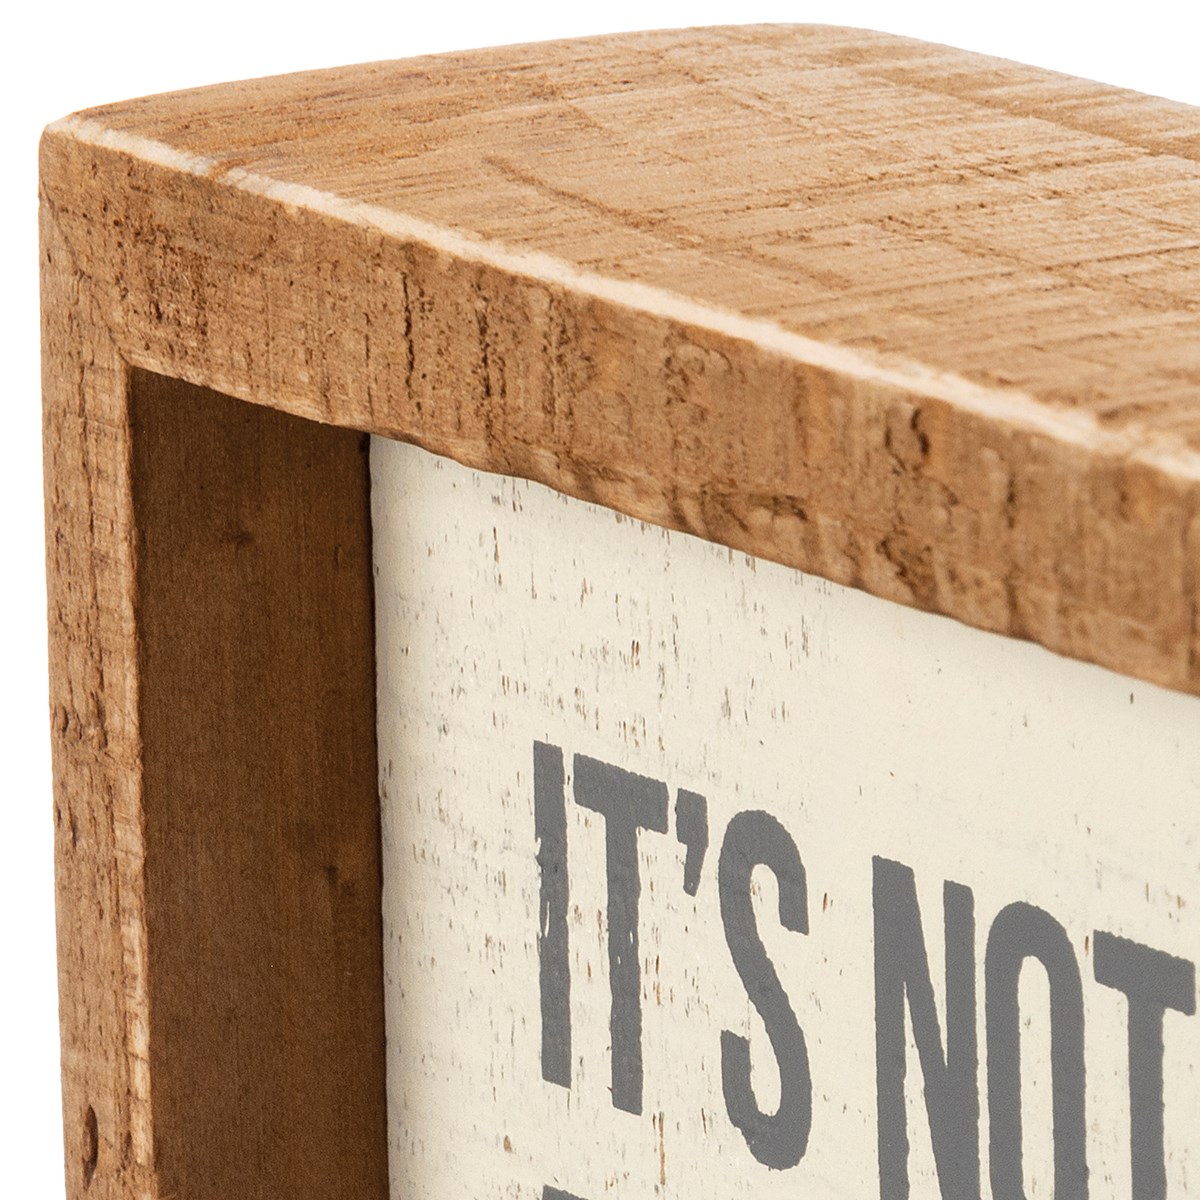 Not What's Under The Tree Inset Box Sign - Wood